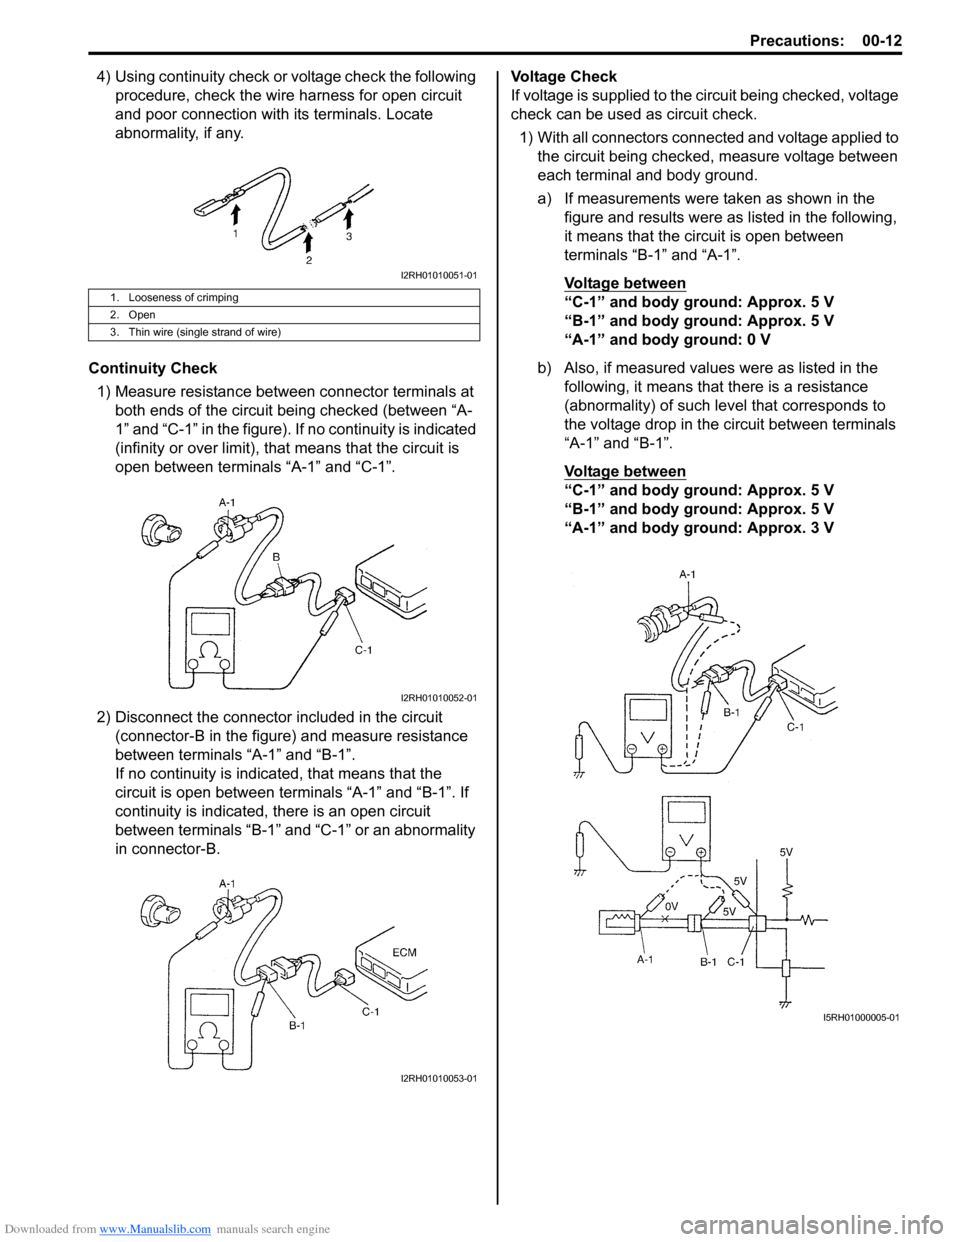 SUZUKI SWIFT 2004 2.G Service Workshop Manual Downloaded from www.Manualslib.com manuals search engine Precautions: 00-12
4) Using continuity check or voltage check the following procedure, check the wire harness for open circuit 
and poor connec